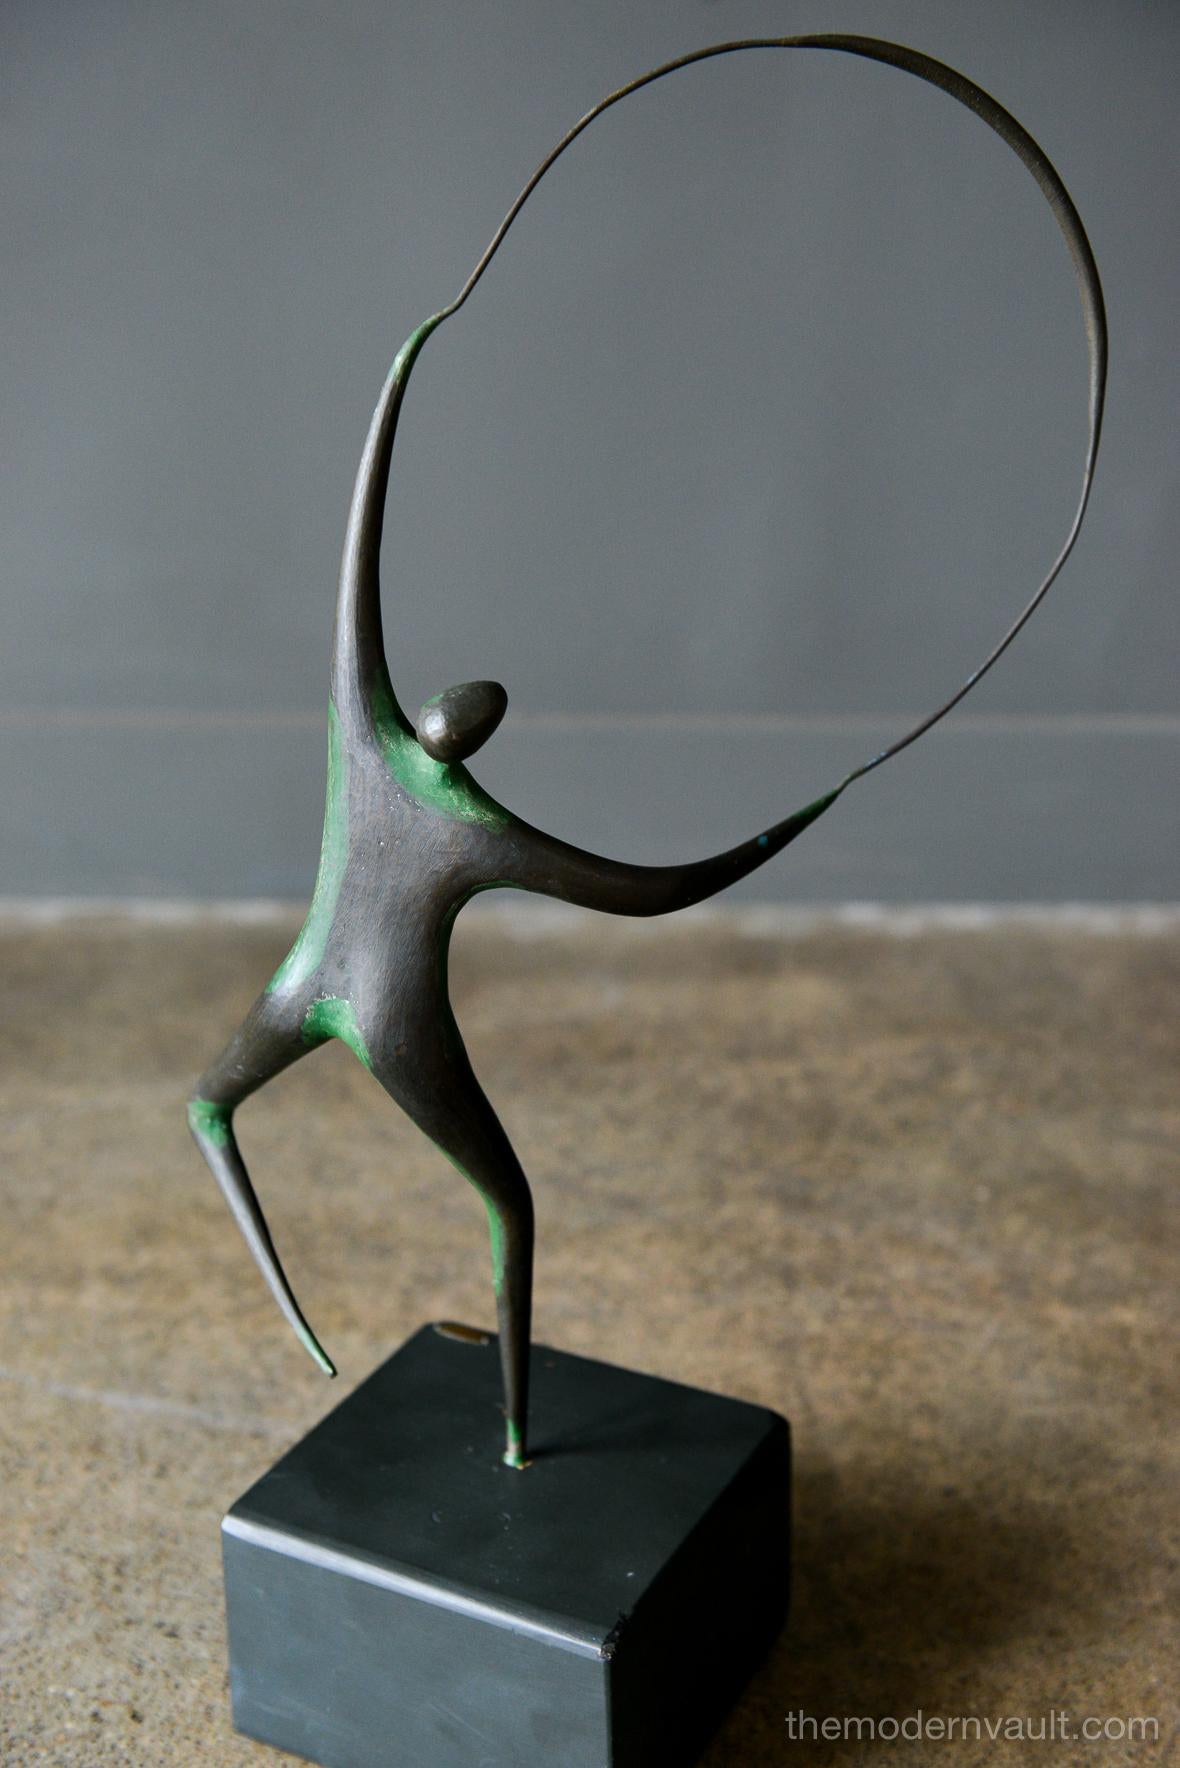 Jere Studios Bronze Acrobat sculpture, circa 1968. A metal jump rope figure with bronze finish by Curtis Jere, circa 1968. Reminiscent of Jack Boyd's figurative bronzes. It measures 22